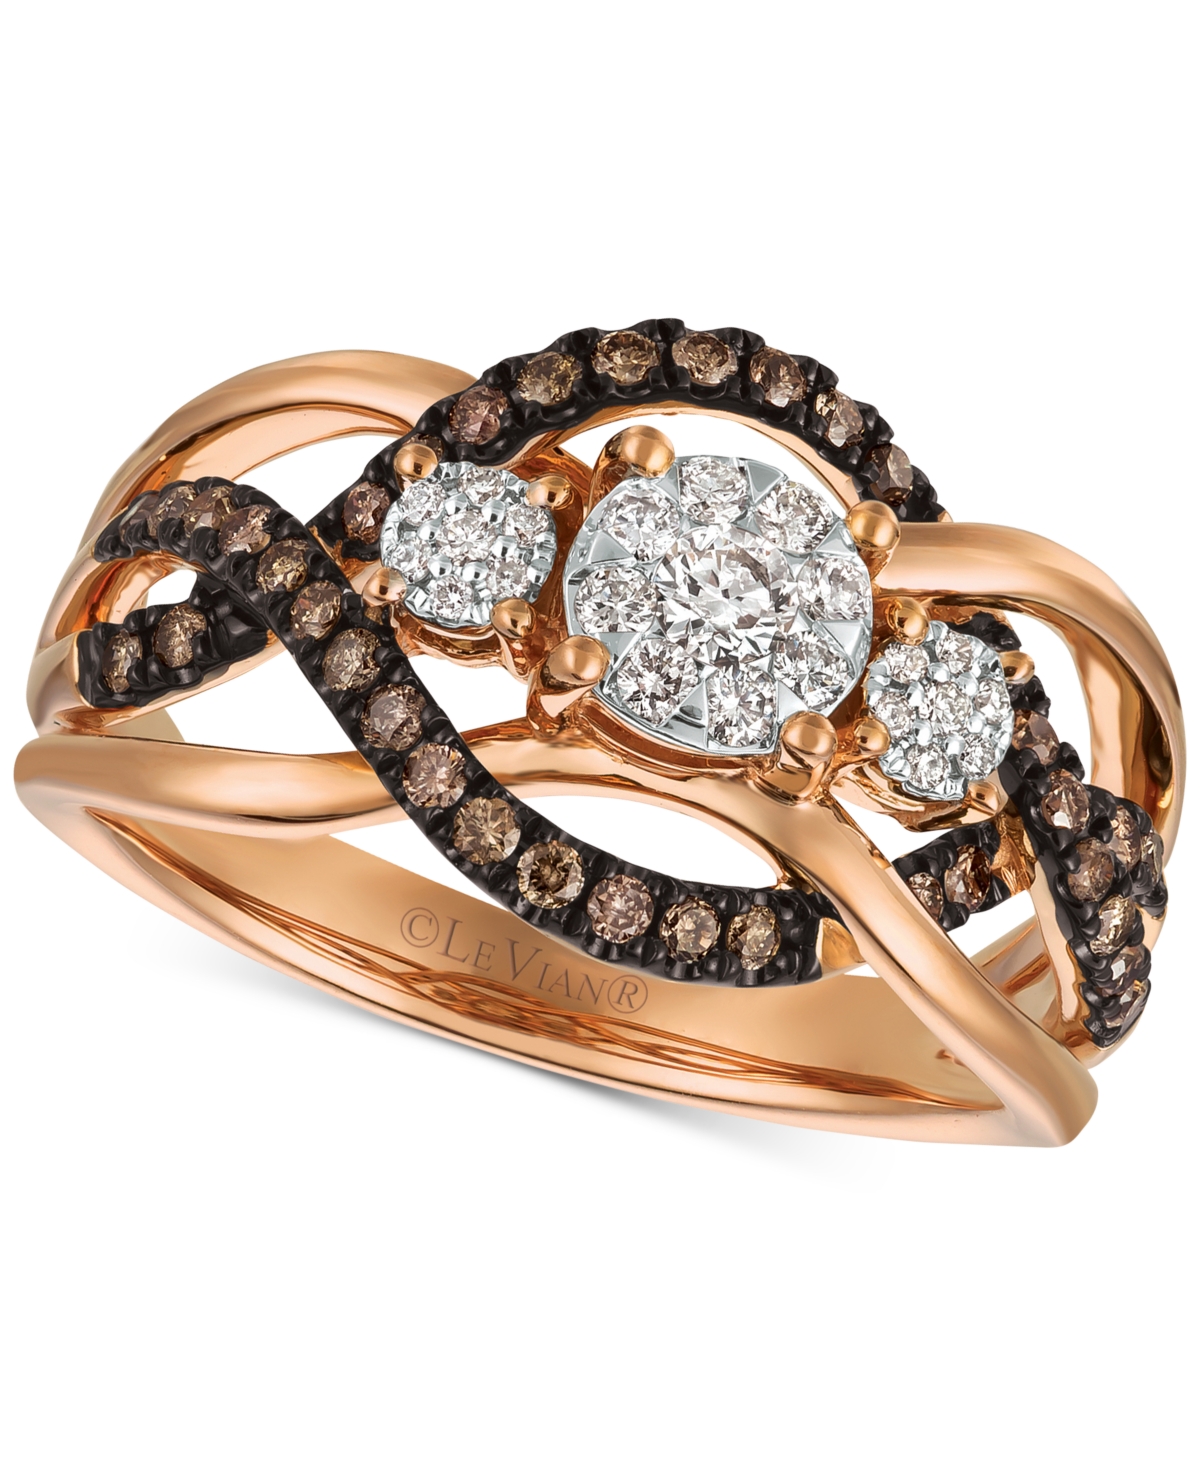 Le Vian Chocolatier Diamond Ring (3/8 ct. t.w.) in 14k Rose Gold (Also Available in Two-Tone White & Yellow Gold or White Gold)